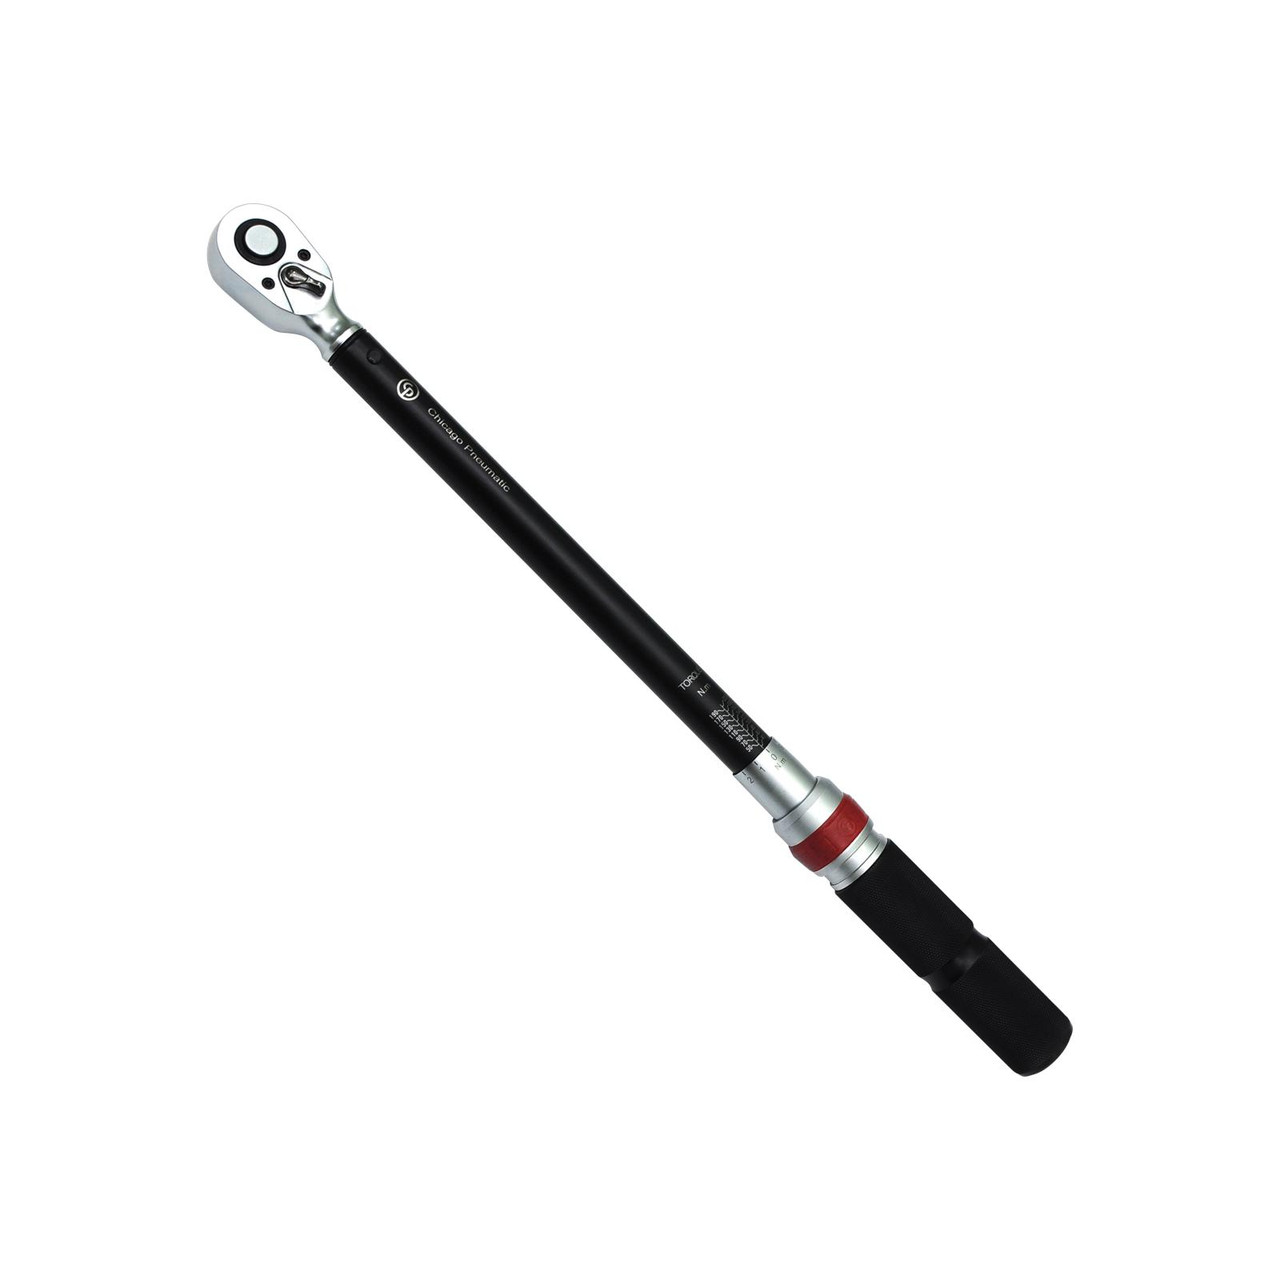 1/4 Drive High-Precision Torque Wrench (40-200 in-lb)